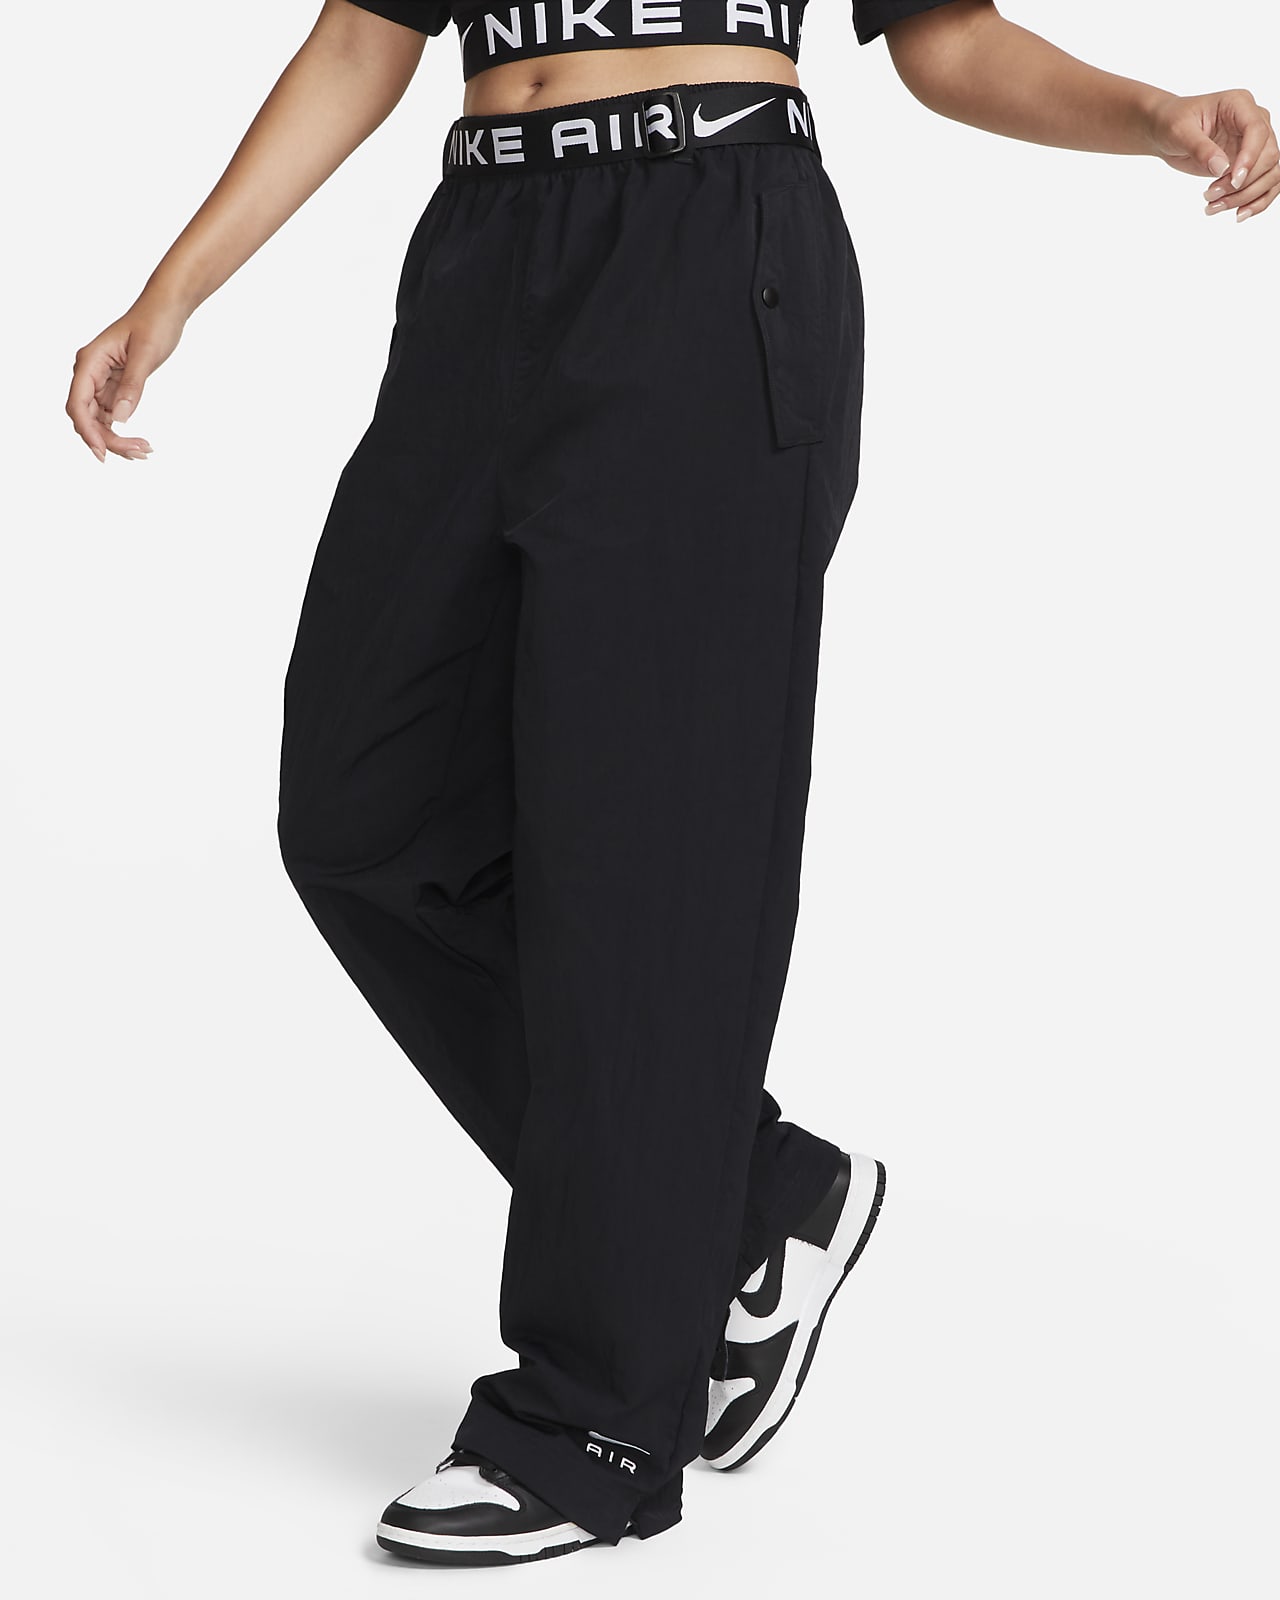 Discover 157+ nike trousers womens best